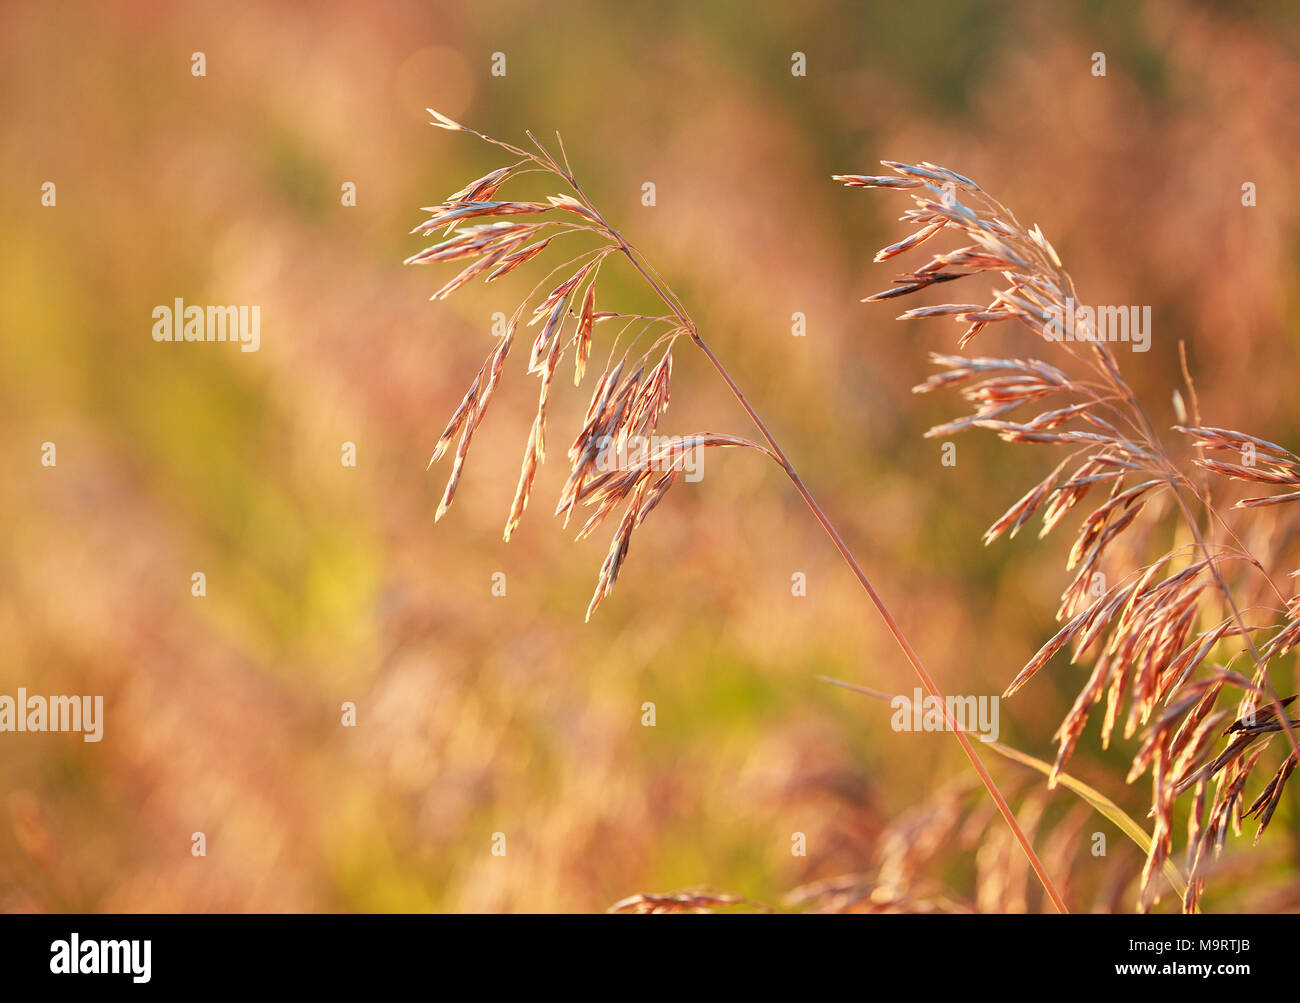 Dry Bromus inermis grass at sunset, selective focus on some branches, close up Stock Photo